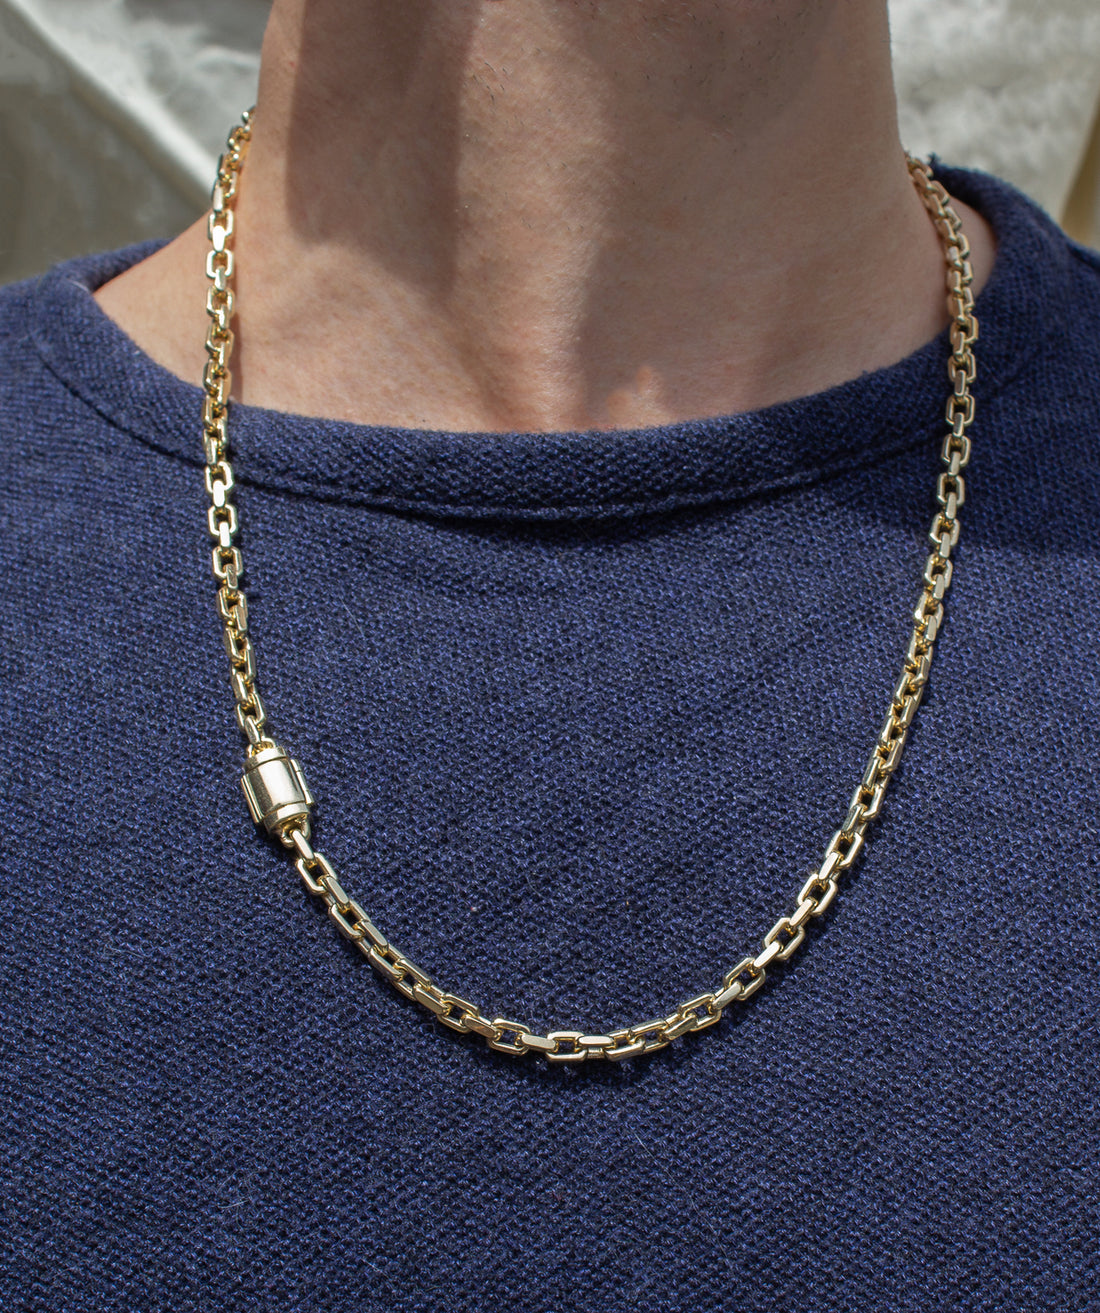 solid cable chain mens toronto, white gold cable chain Toronto, solid gold cable chain Canada